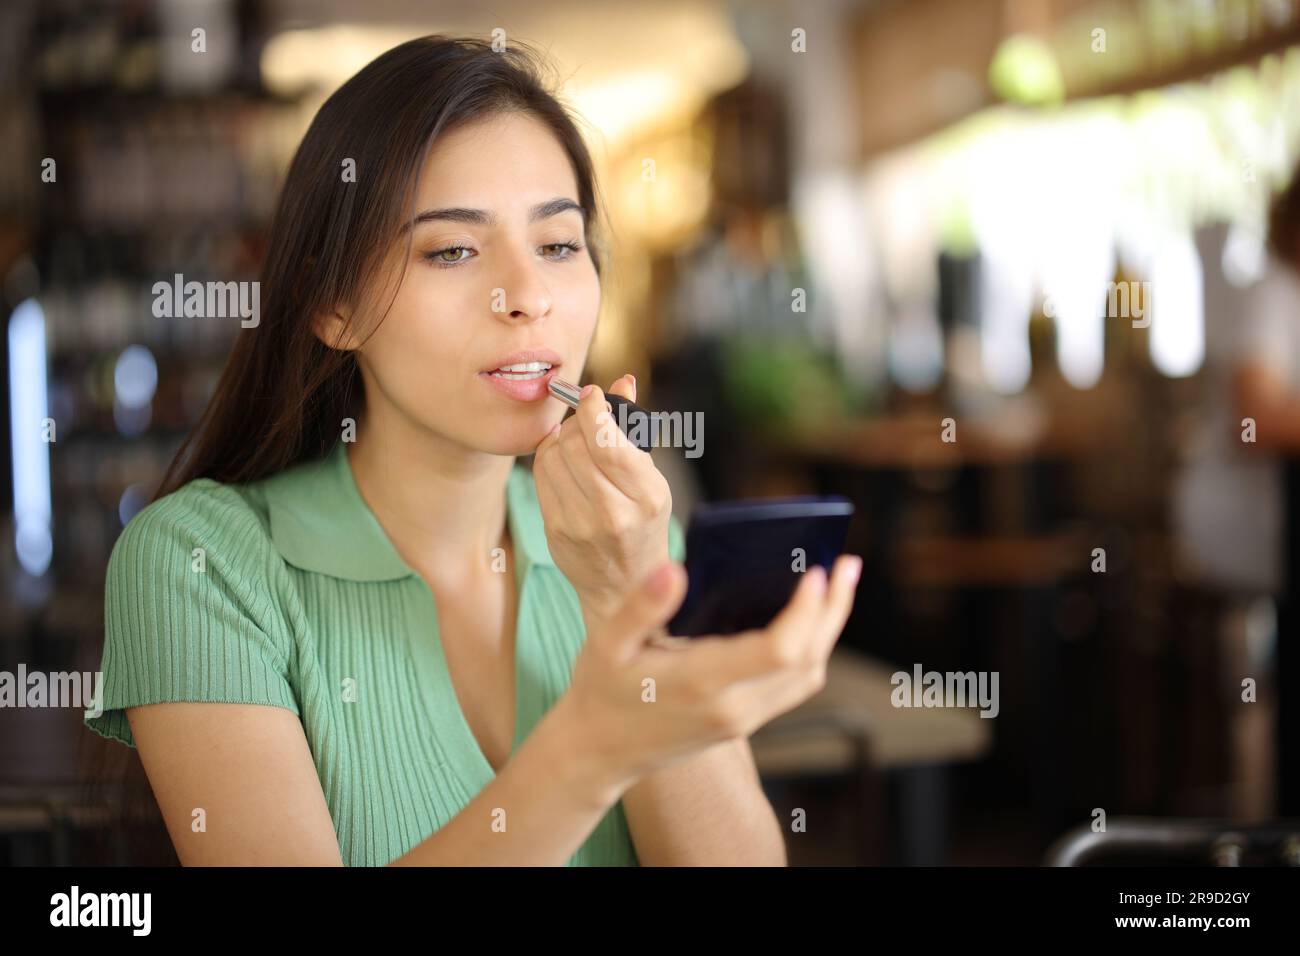 Woman painting lips before dating in a restaurant interior Stock Photo